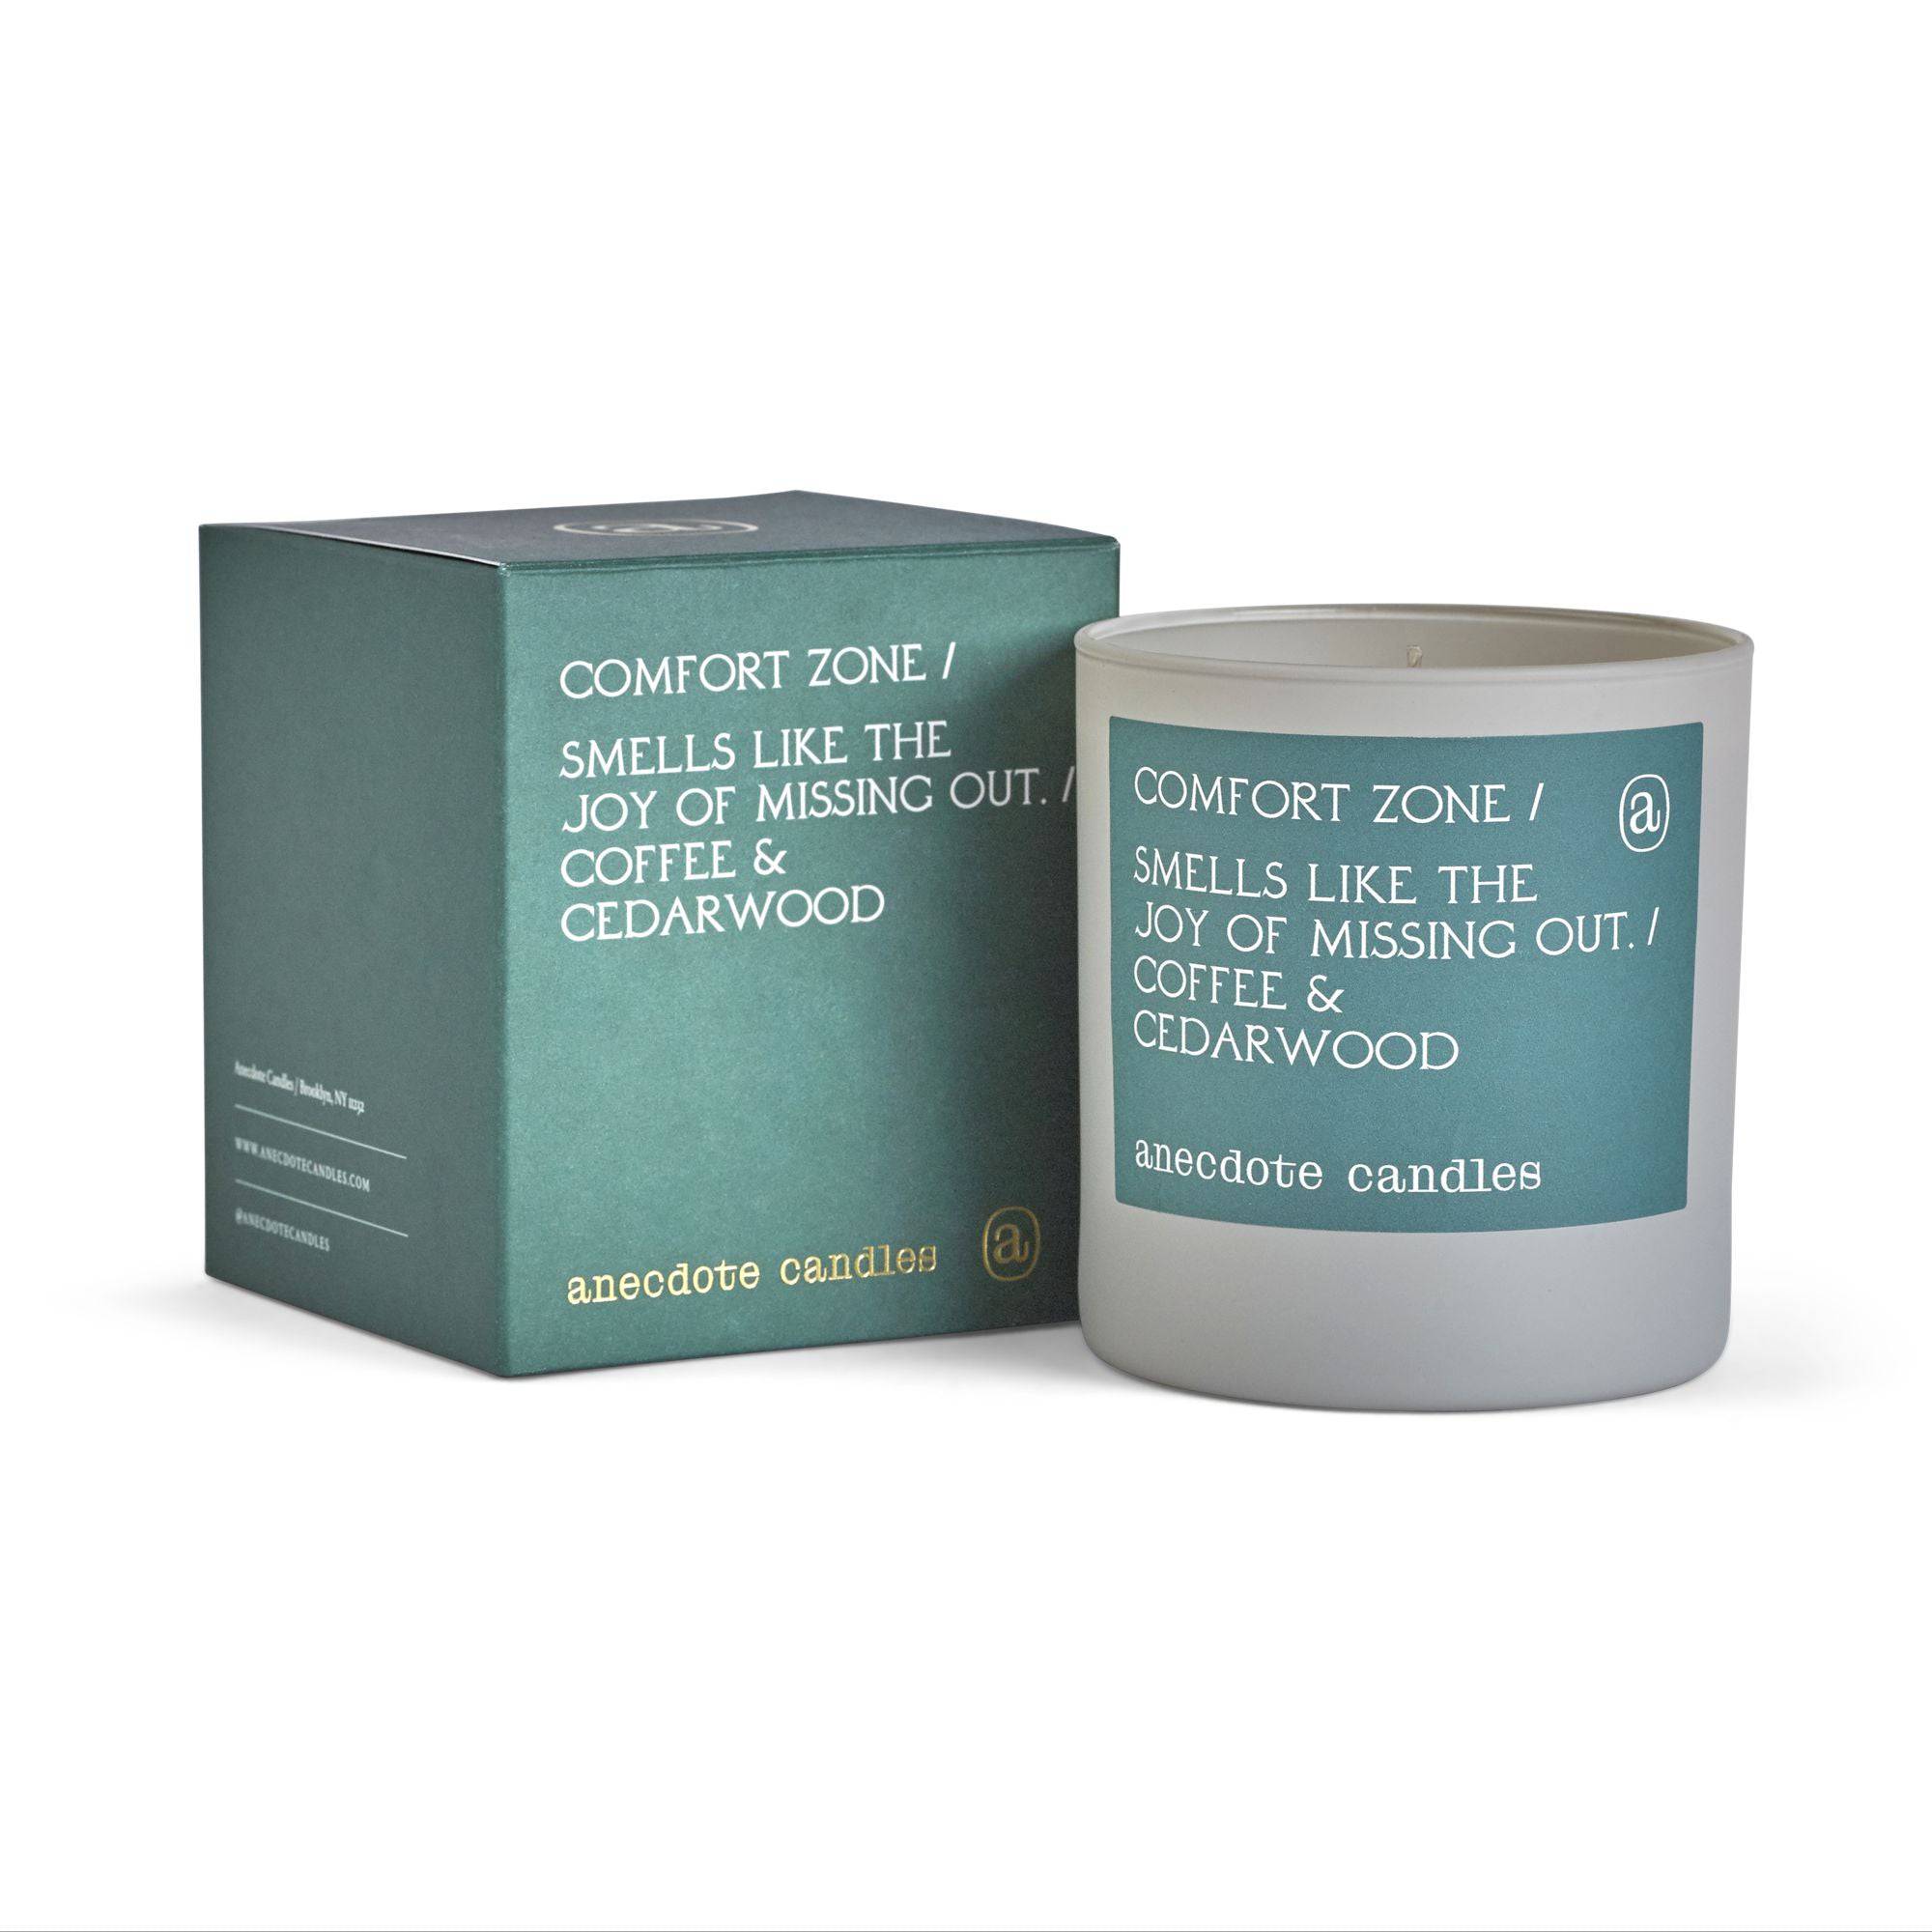 Comfort Zone (Coffee & Cedarwood) Candle: 9 oz boxed tumbler - The Preppy Bunny